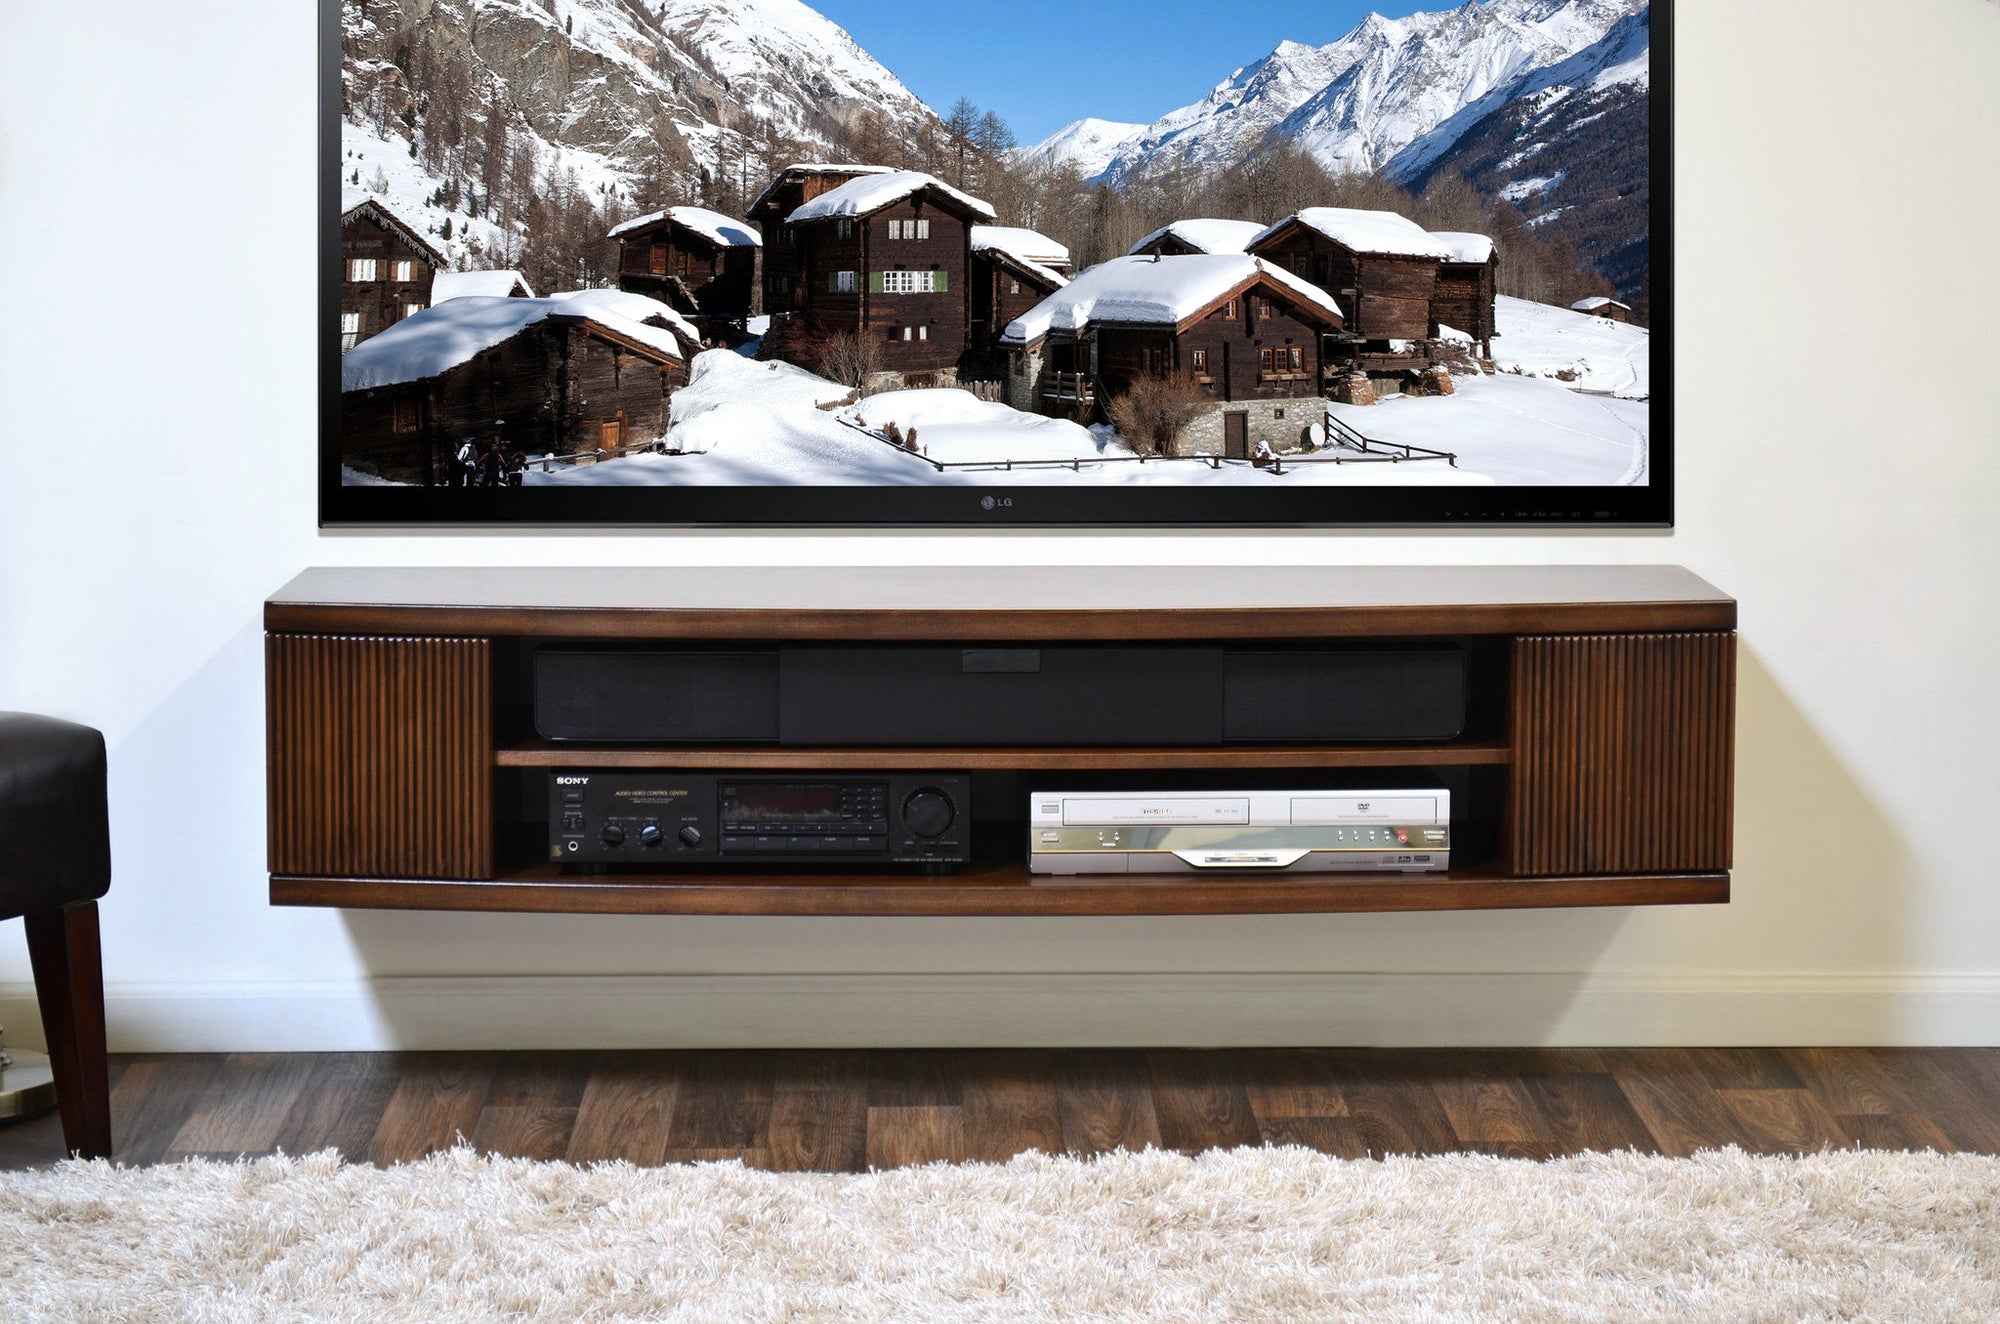 Curved Round Floating TV Console - The Curve - Mocha